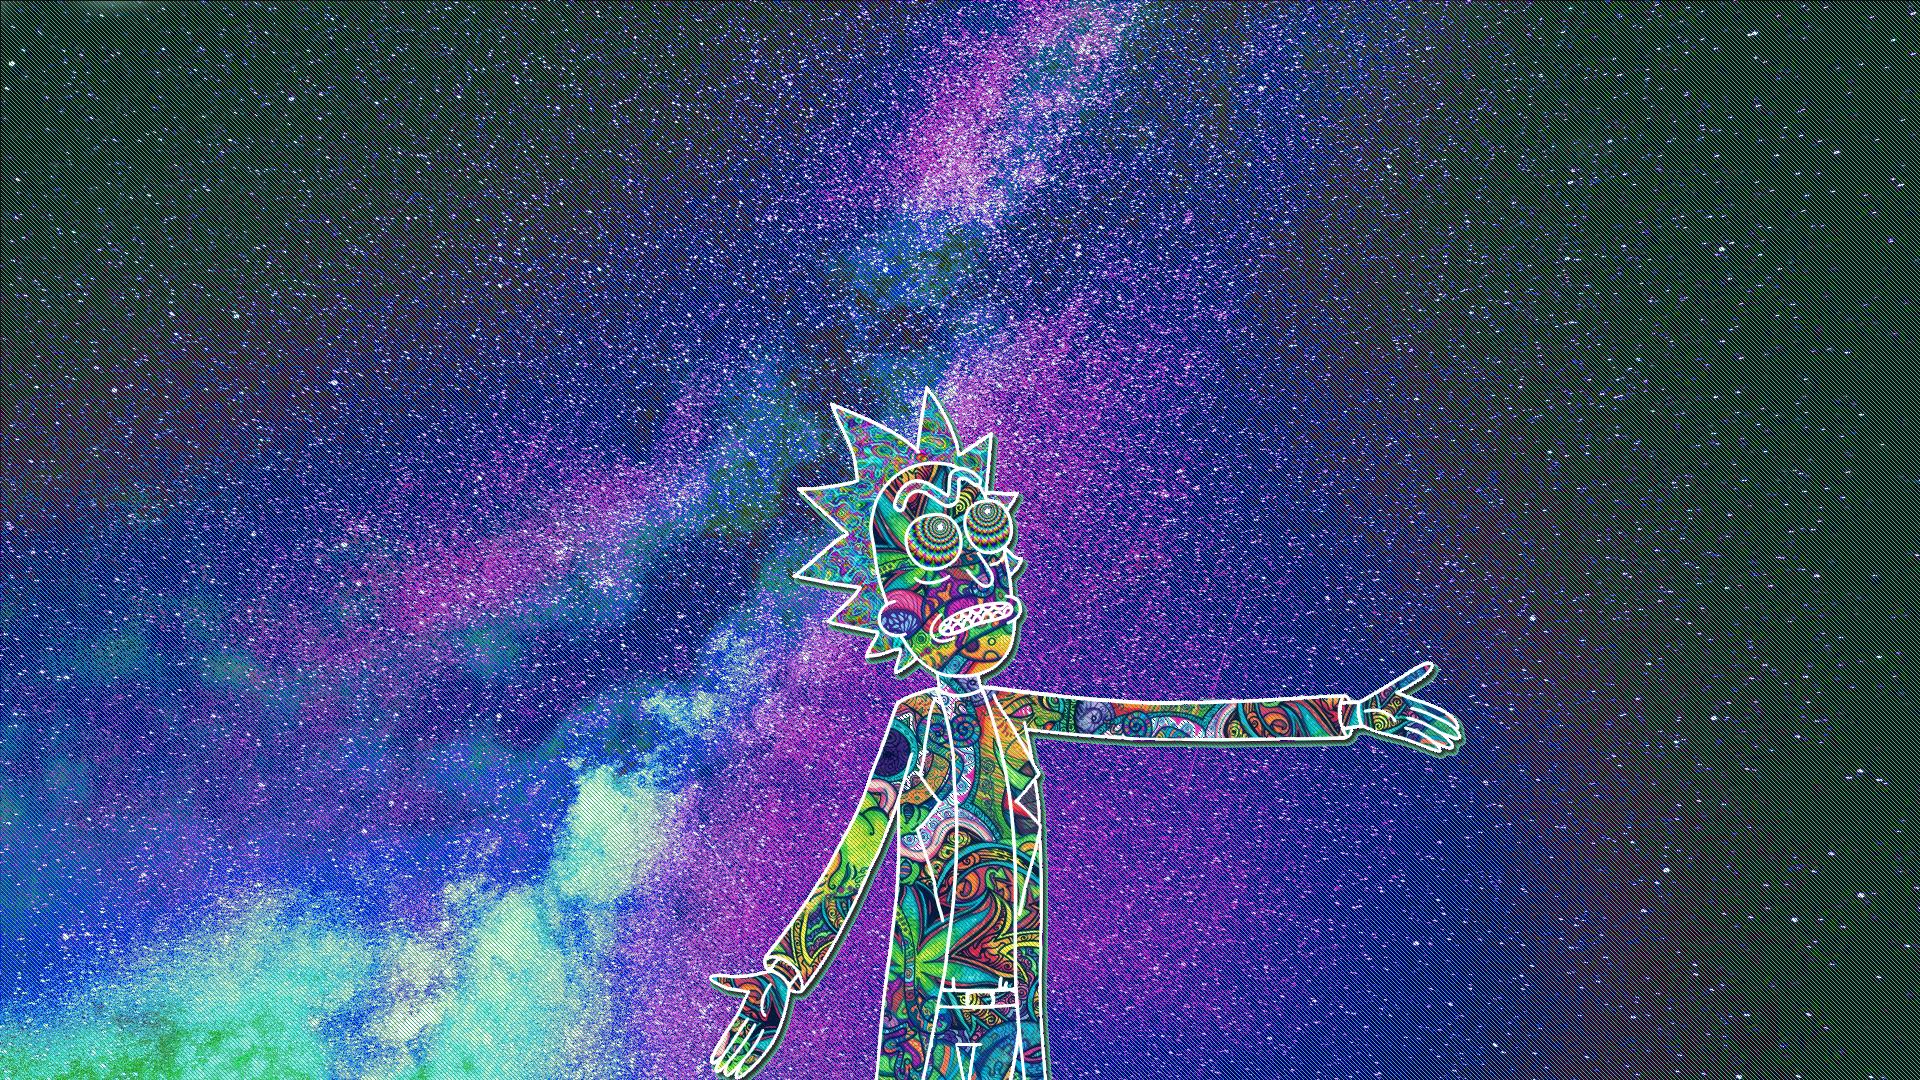 Steam WorkshopRick and Morty Trippy Wallpaper